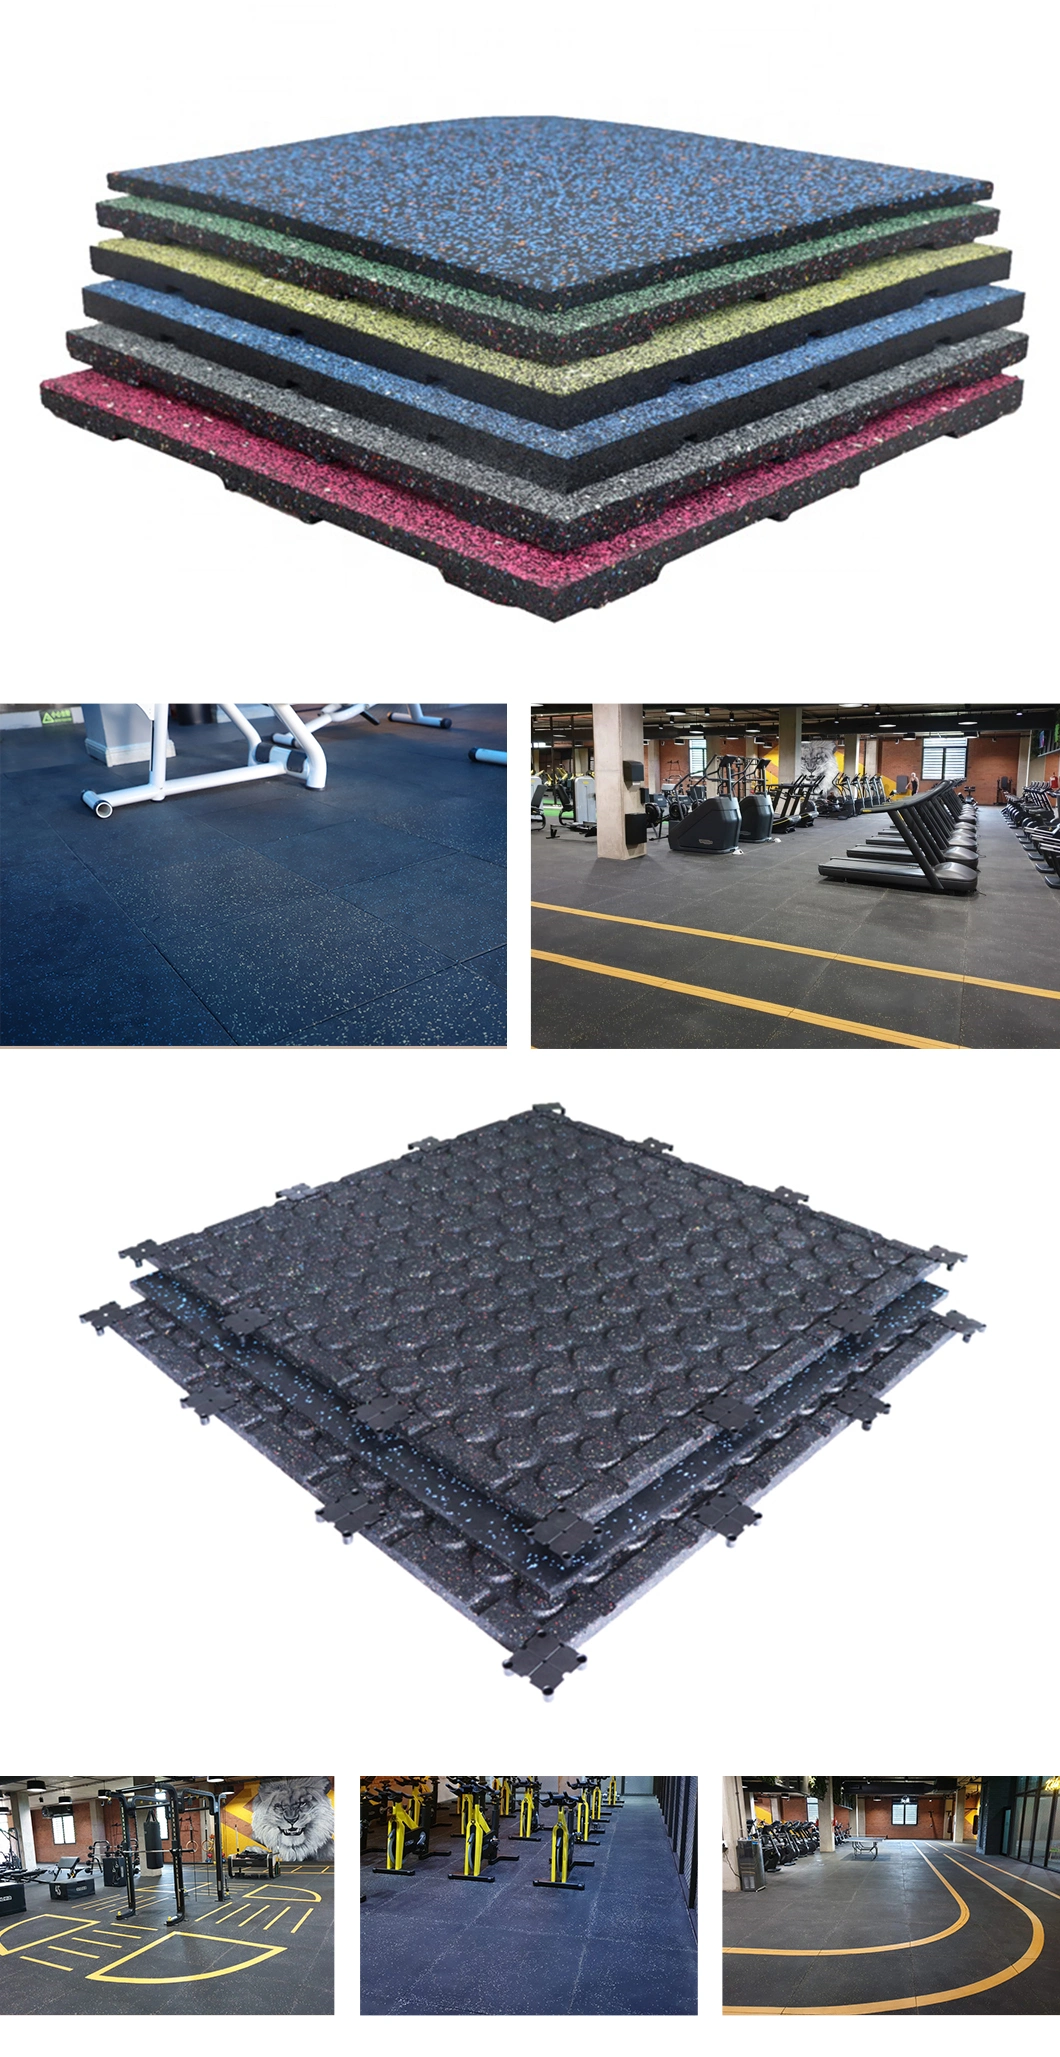 China Pisos De Caucho Recycled Playground Puzzle Yoga Interlocking Foam EPDM Fitness Crossfit Rubber Gym All Rubber Carpet Tiles Roll Floor Mats for Playground